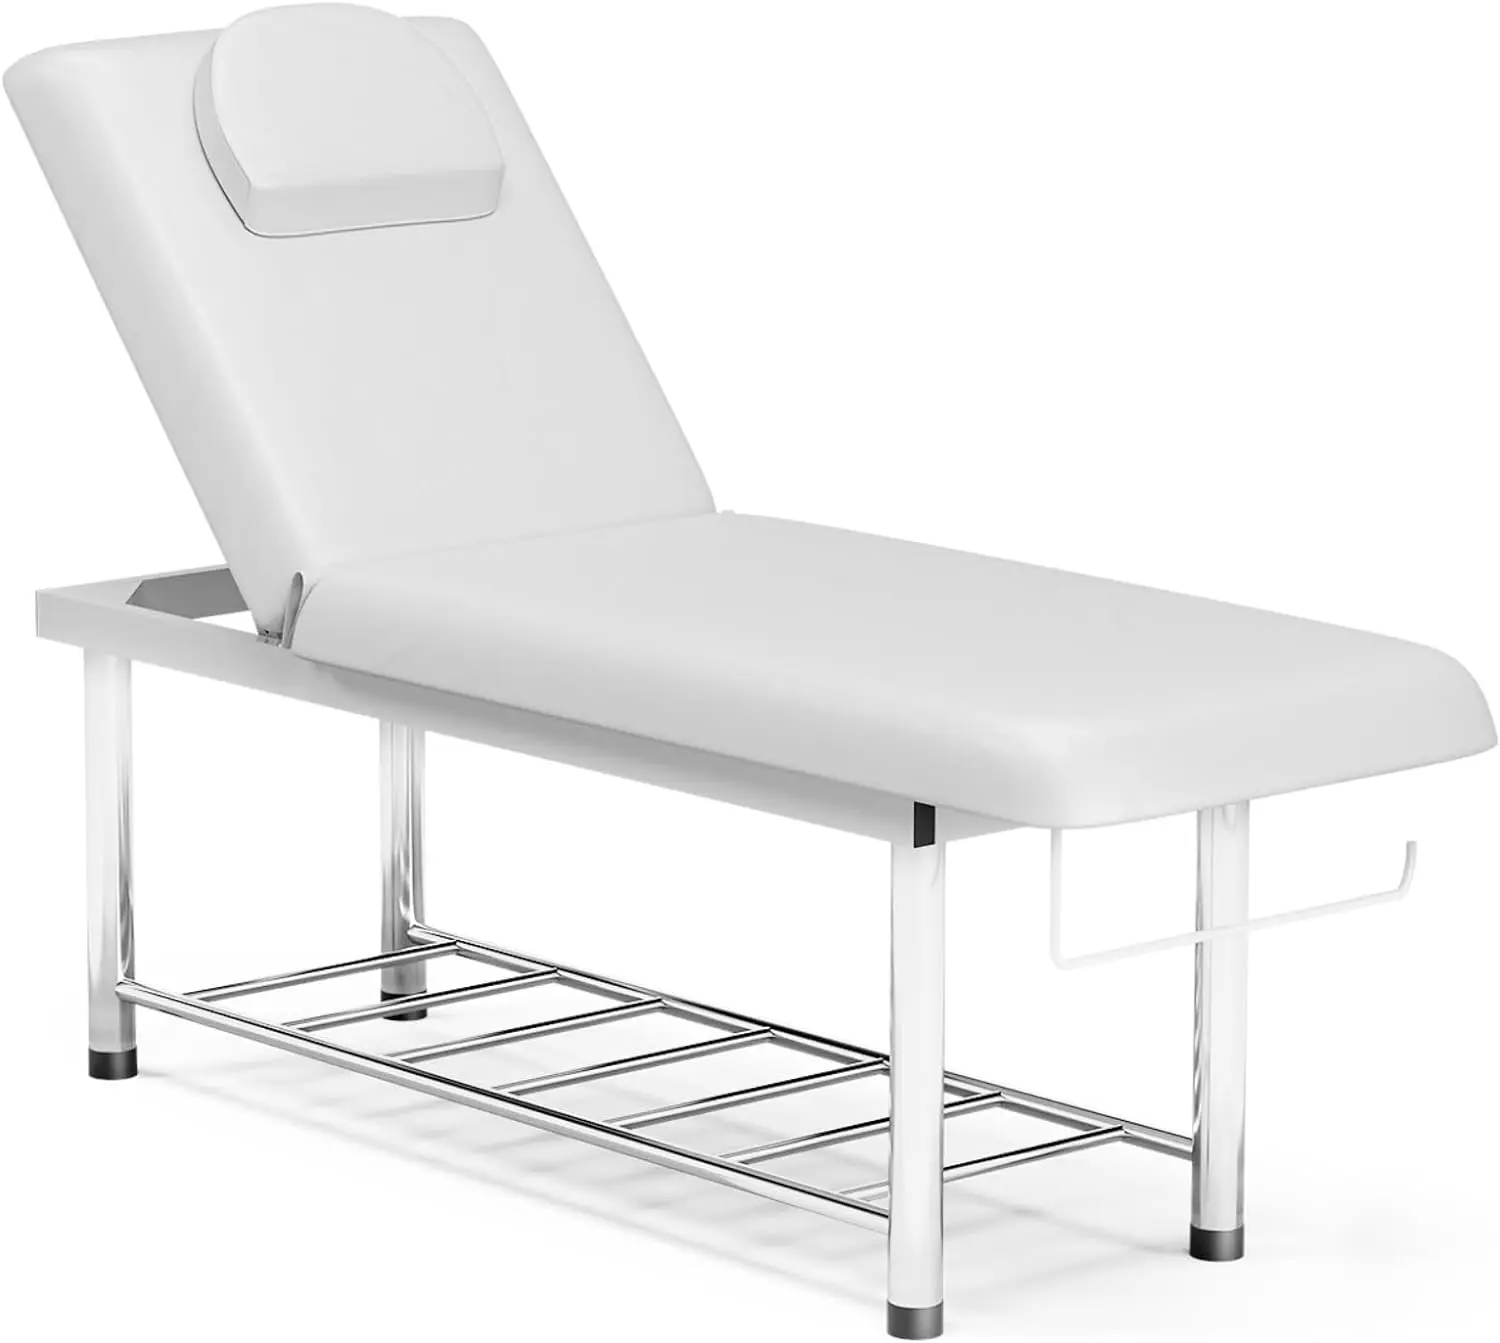 Professioanl Massage Table Stationary 550lbs Heavy Duty Exam Bed for Treatment Medical Therapy Tattoo Facial Salon, Backr